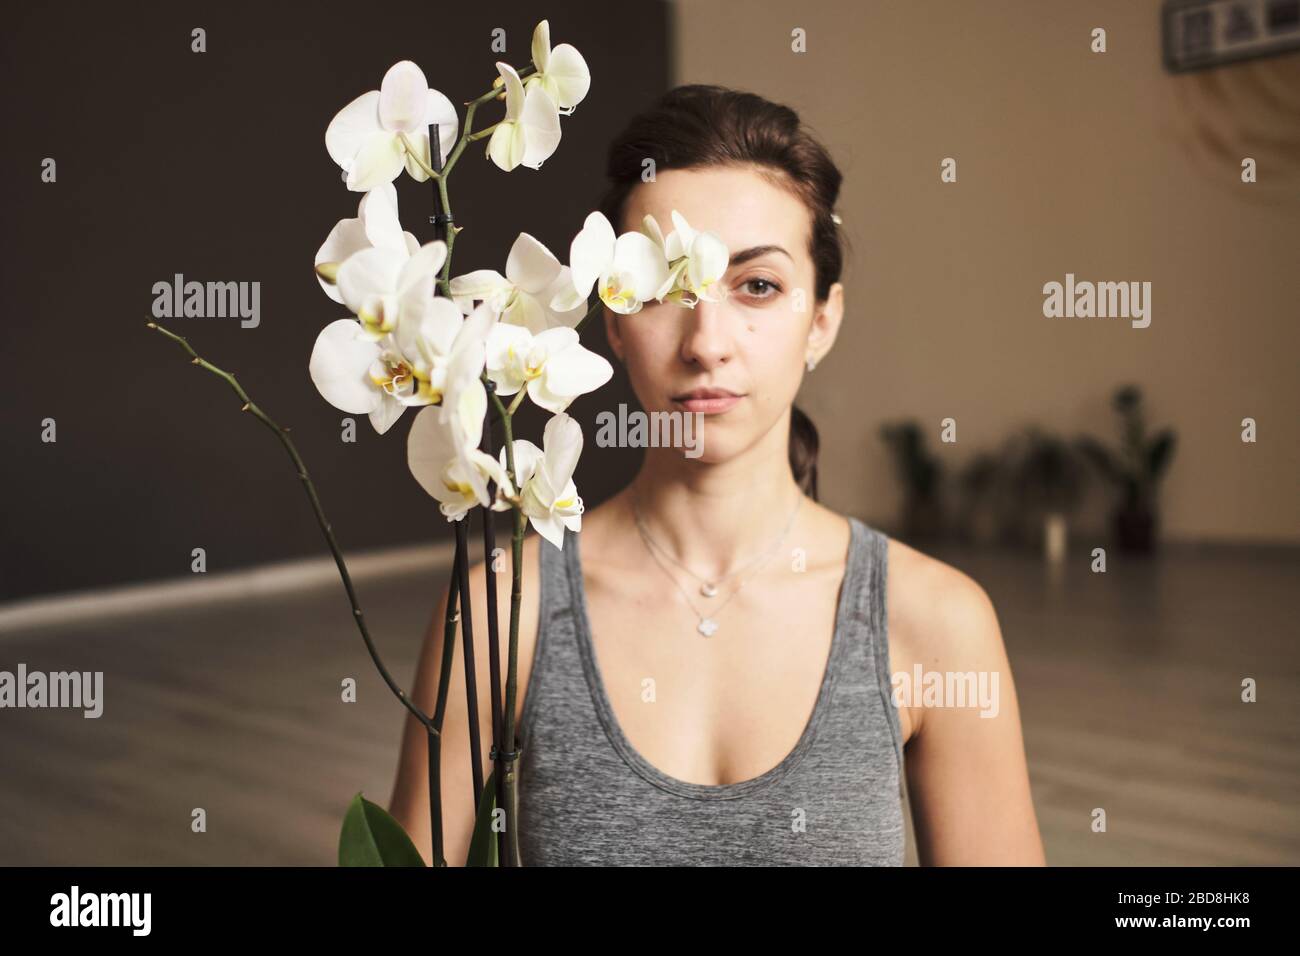 young woman 30 years old with flowers and home flowerpots Stock Photo